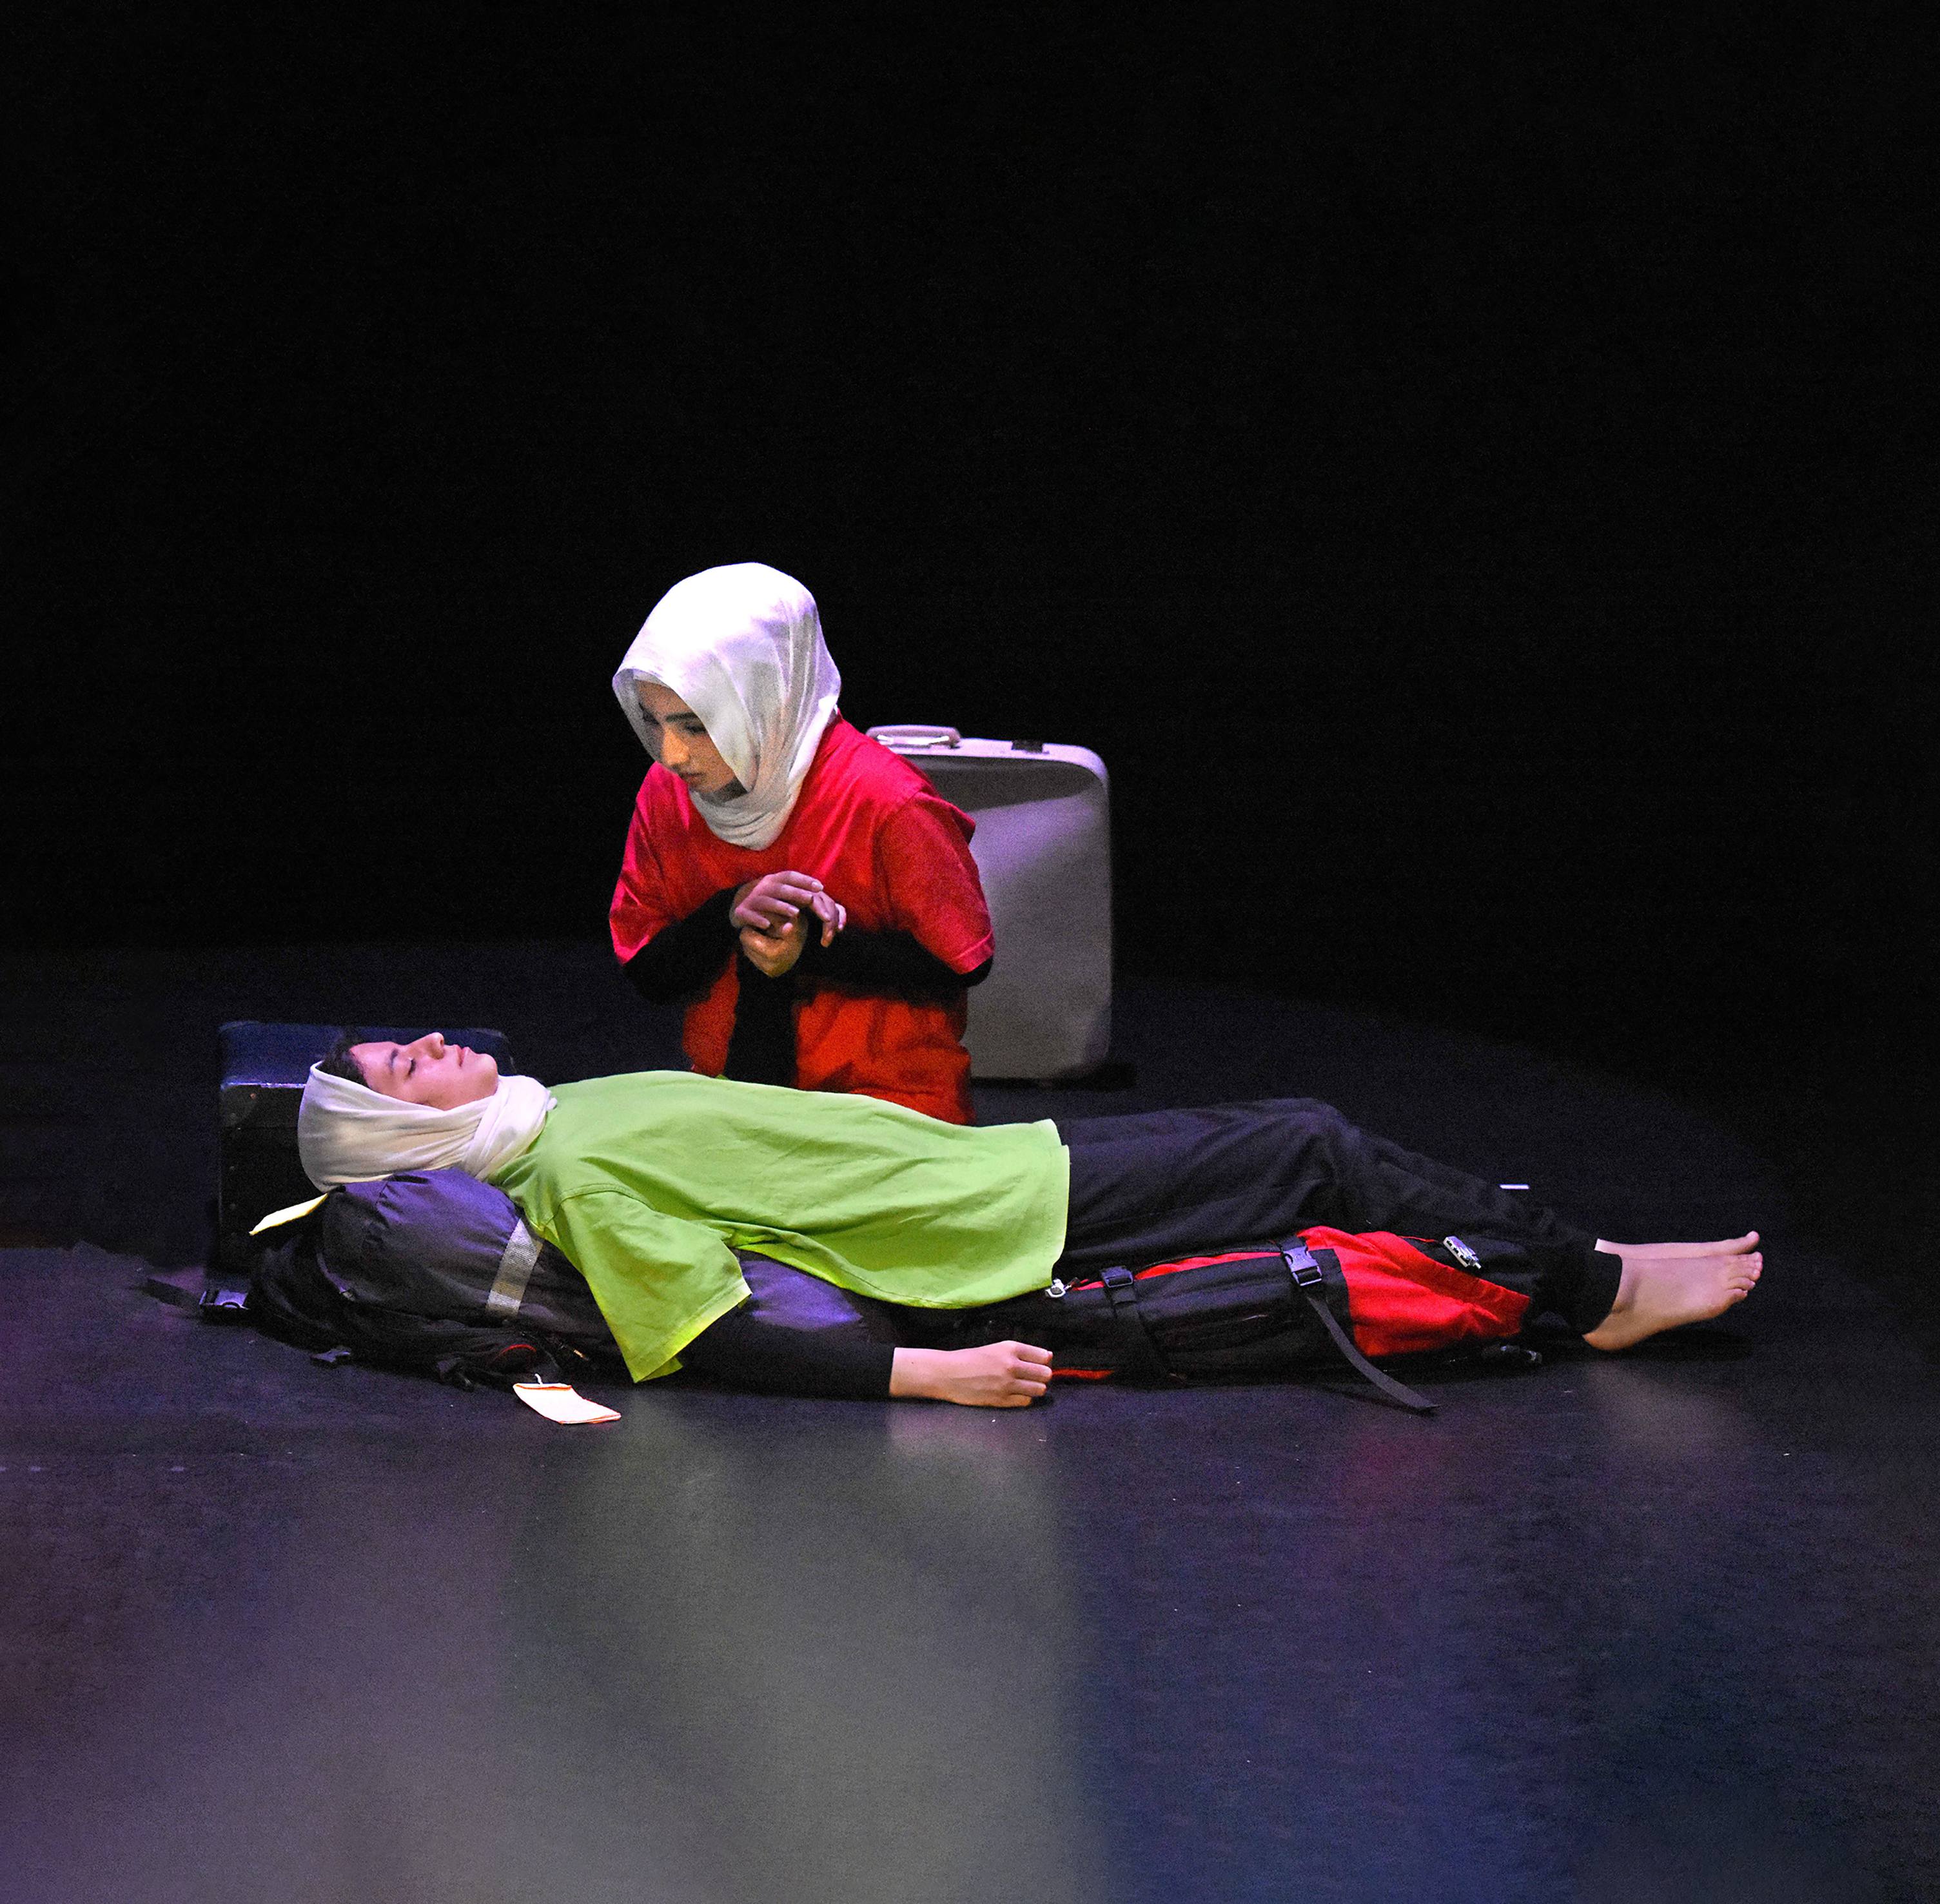 Promotional image for “Refugees Diaries”, playing at Seymour Centre